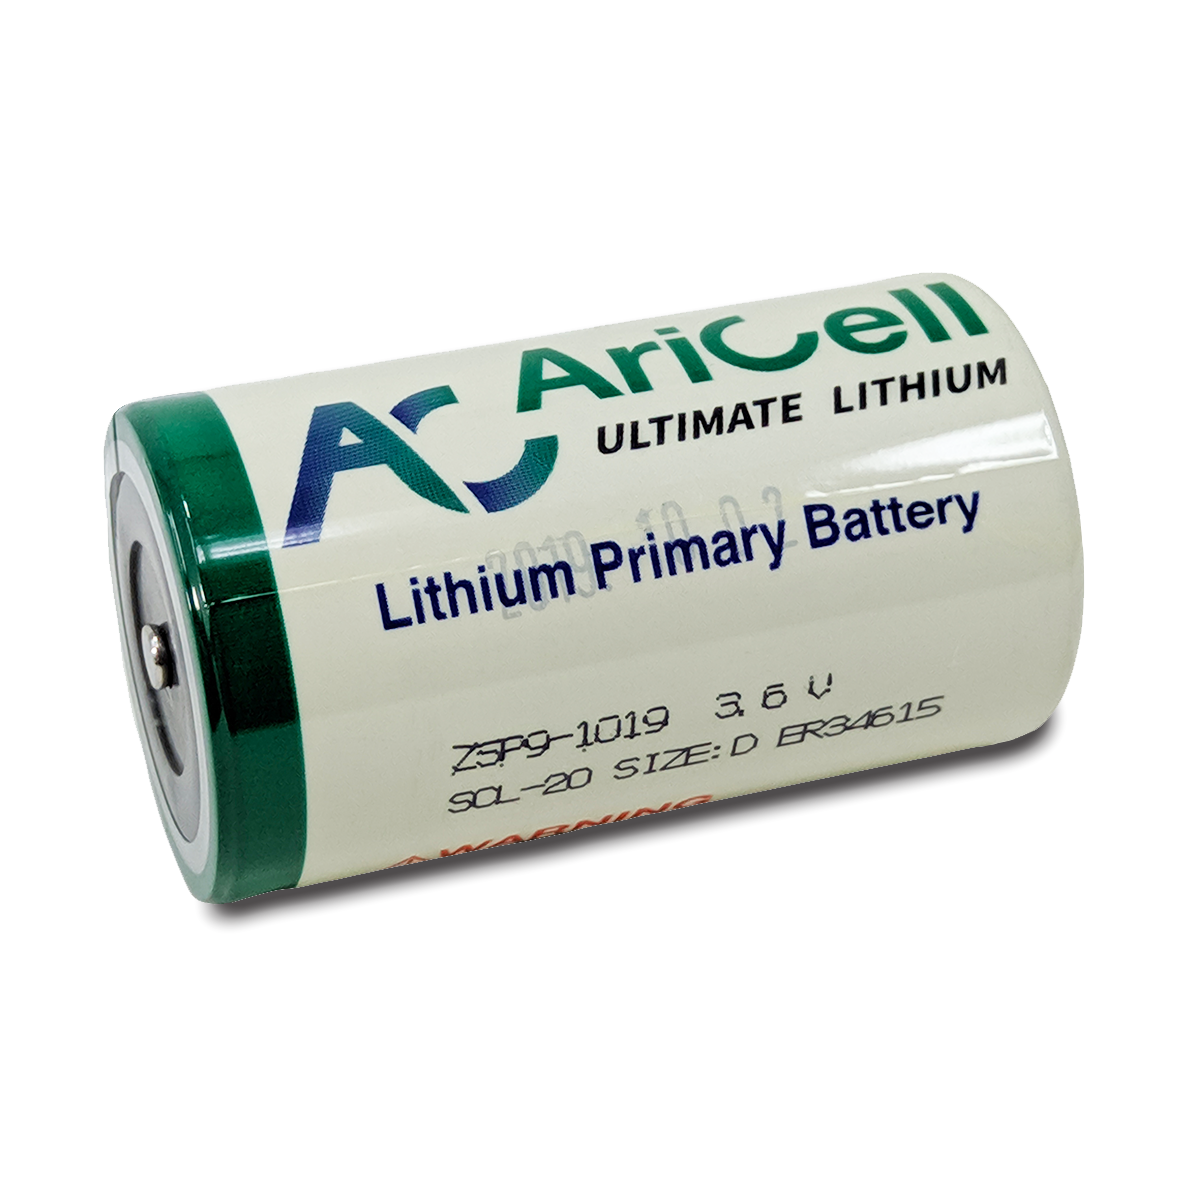 D Cell Battery - Replacements and Equivalents